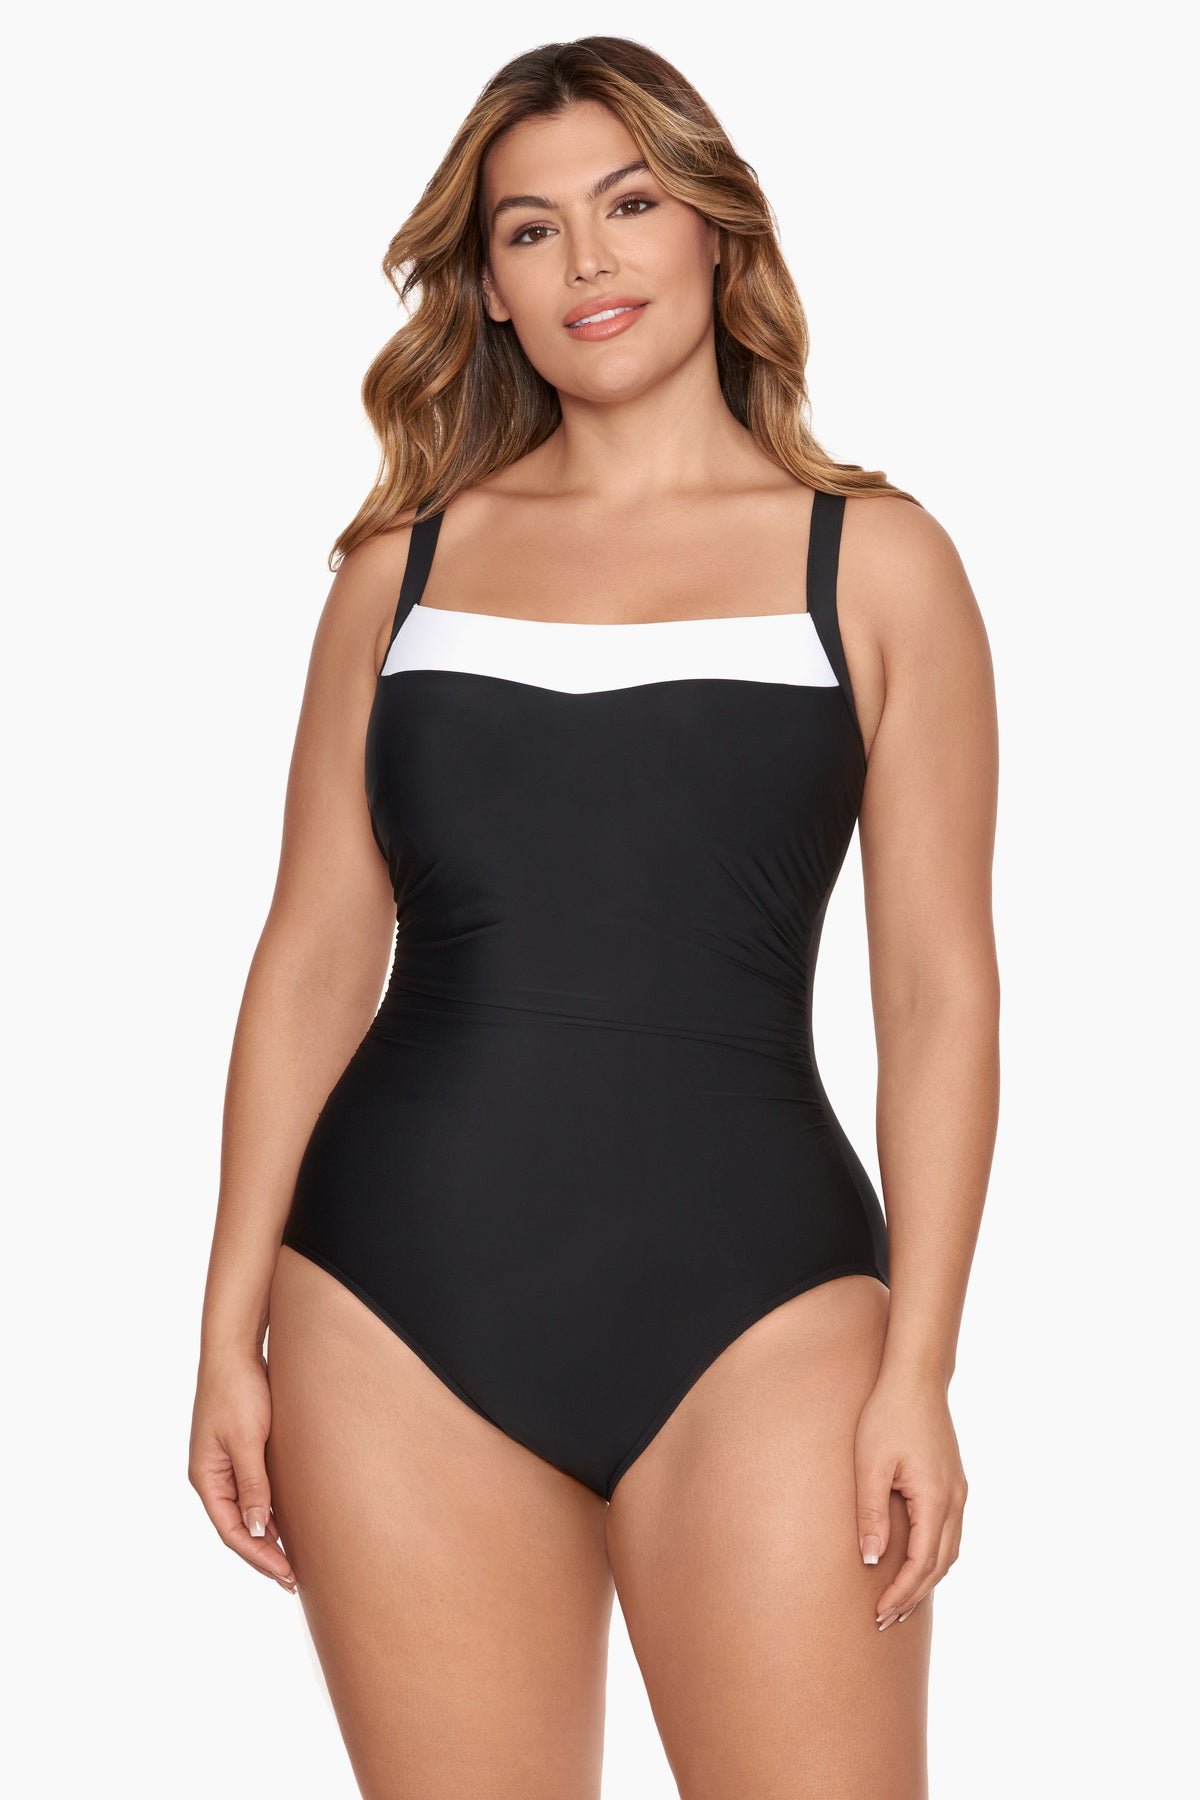 Must Haves Sanibel Underwire One-Piece DD-Cups Swimsuit